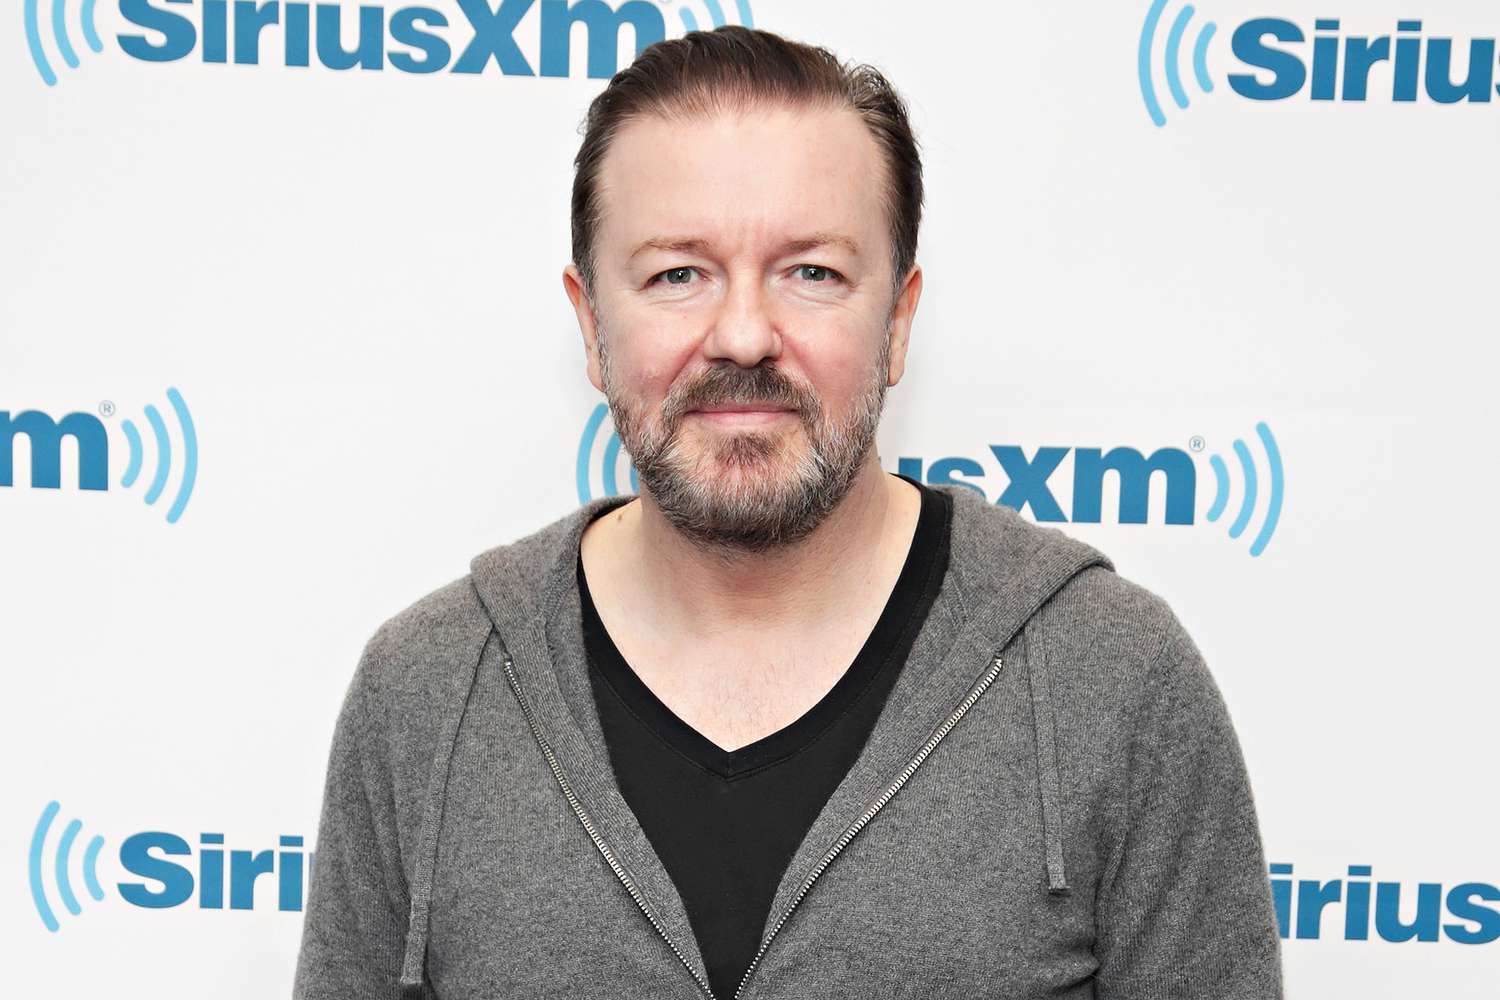 Actor And Comedian Ricky Gervais Interviewed For SiriusXM's Town Hall Series With Hosts Jim Norton & Sam Roberts